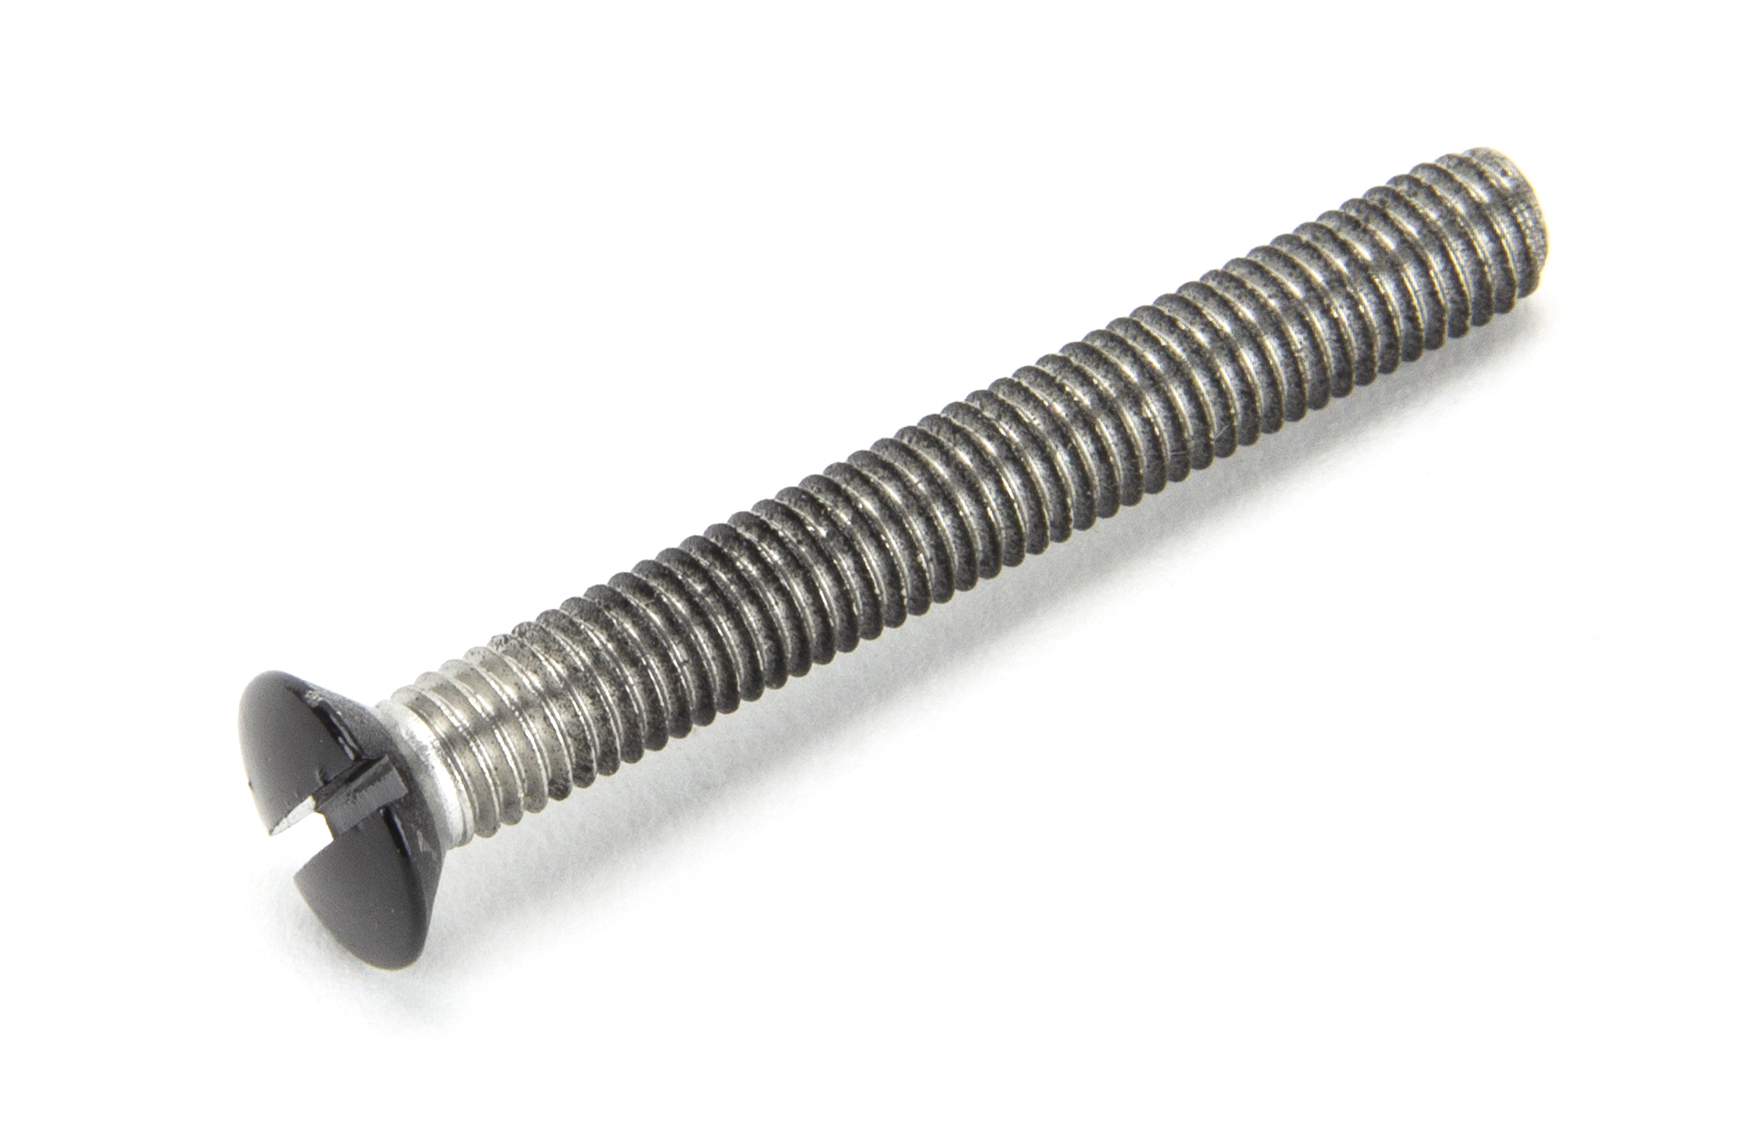 Stainless Steel Male Screw - M5 x 40mm - Each